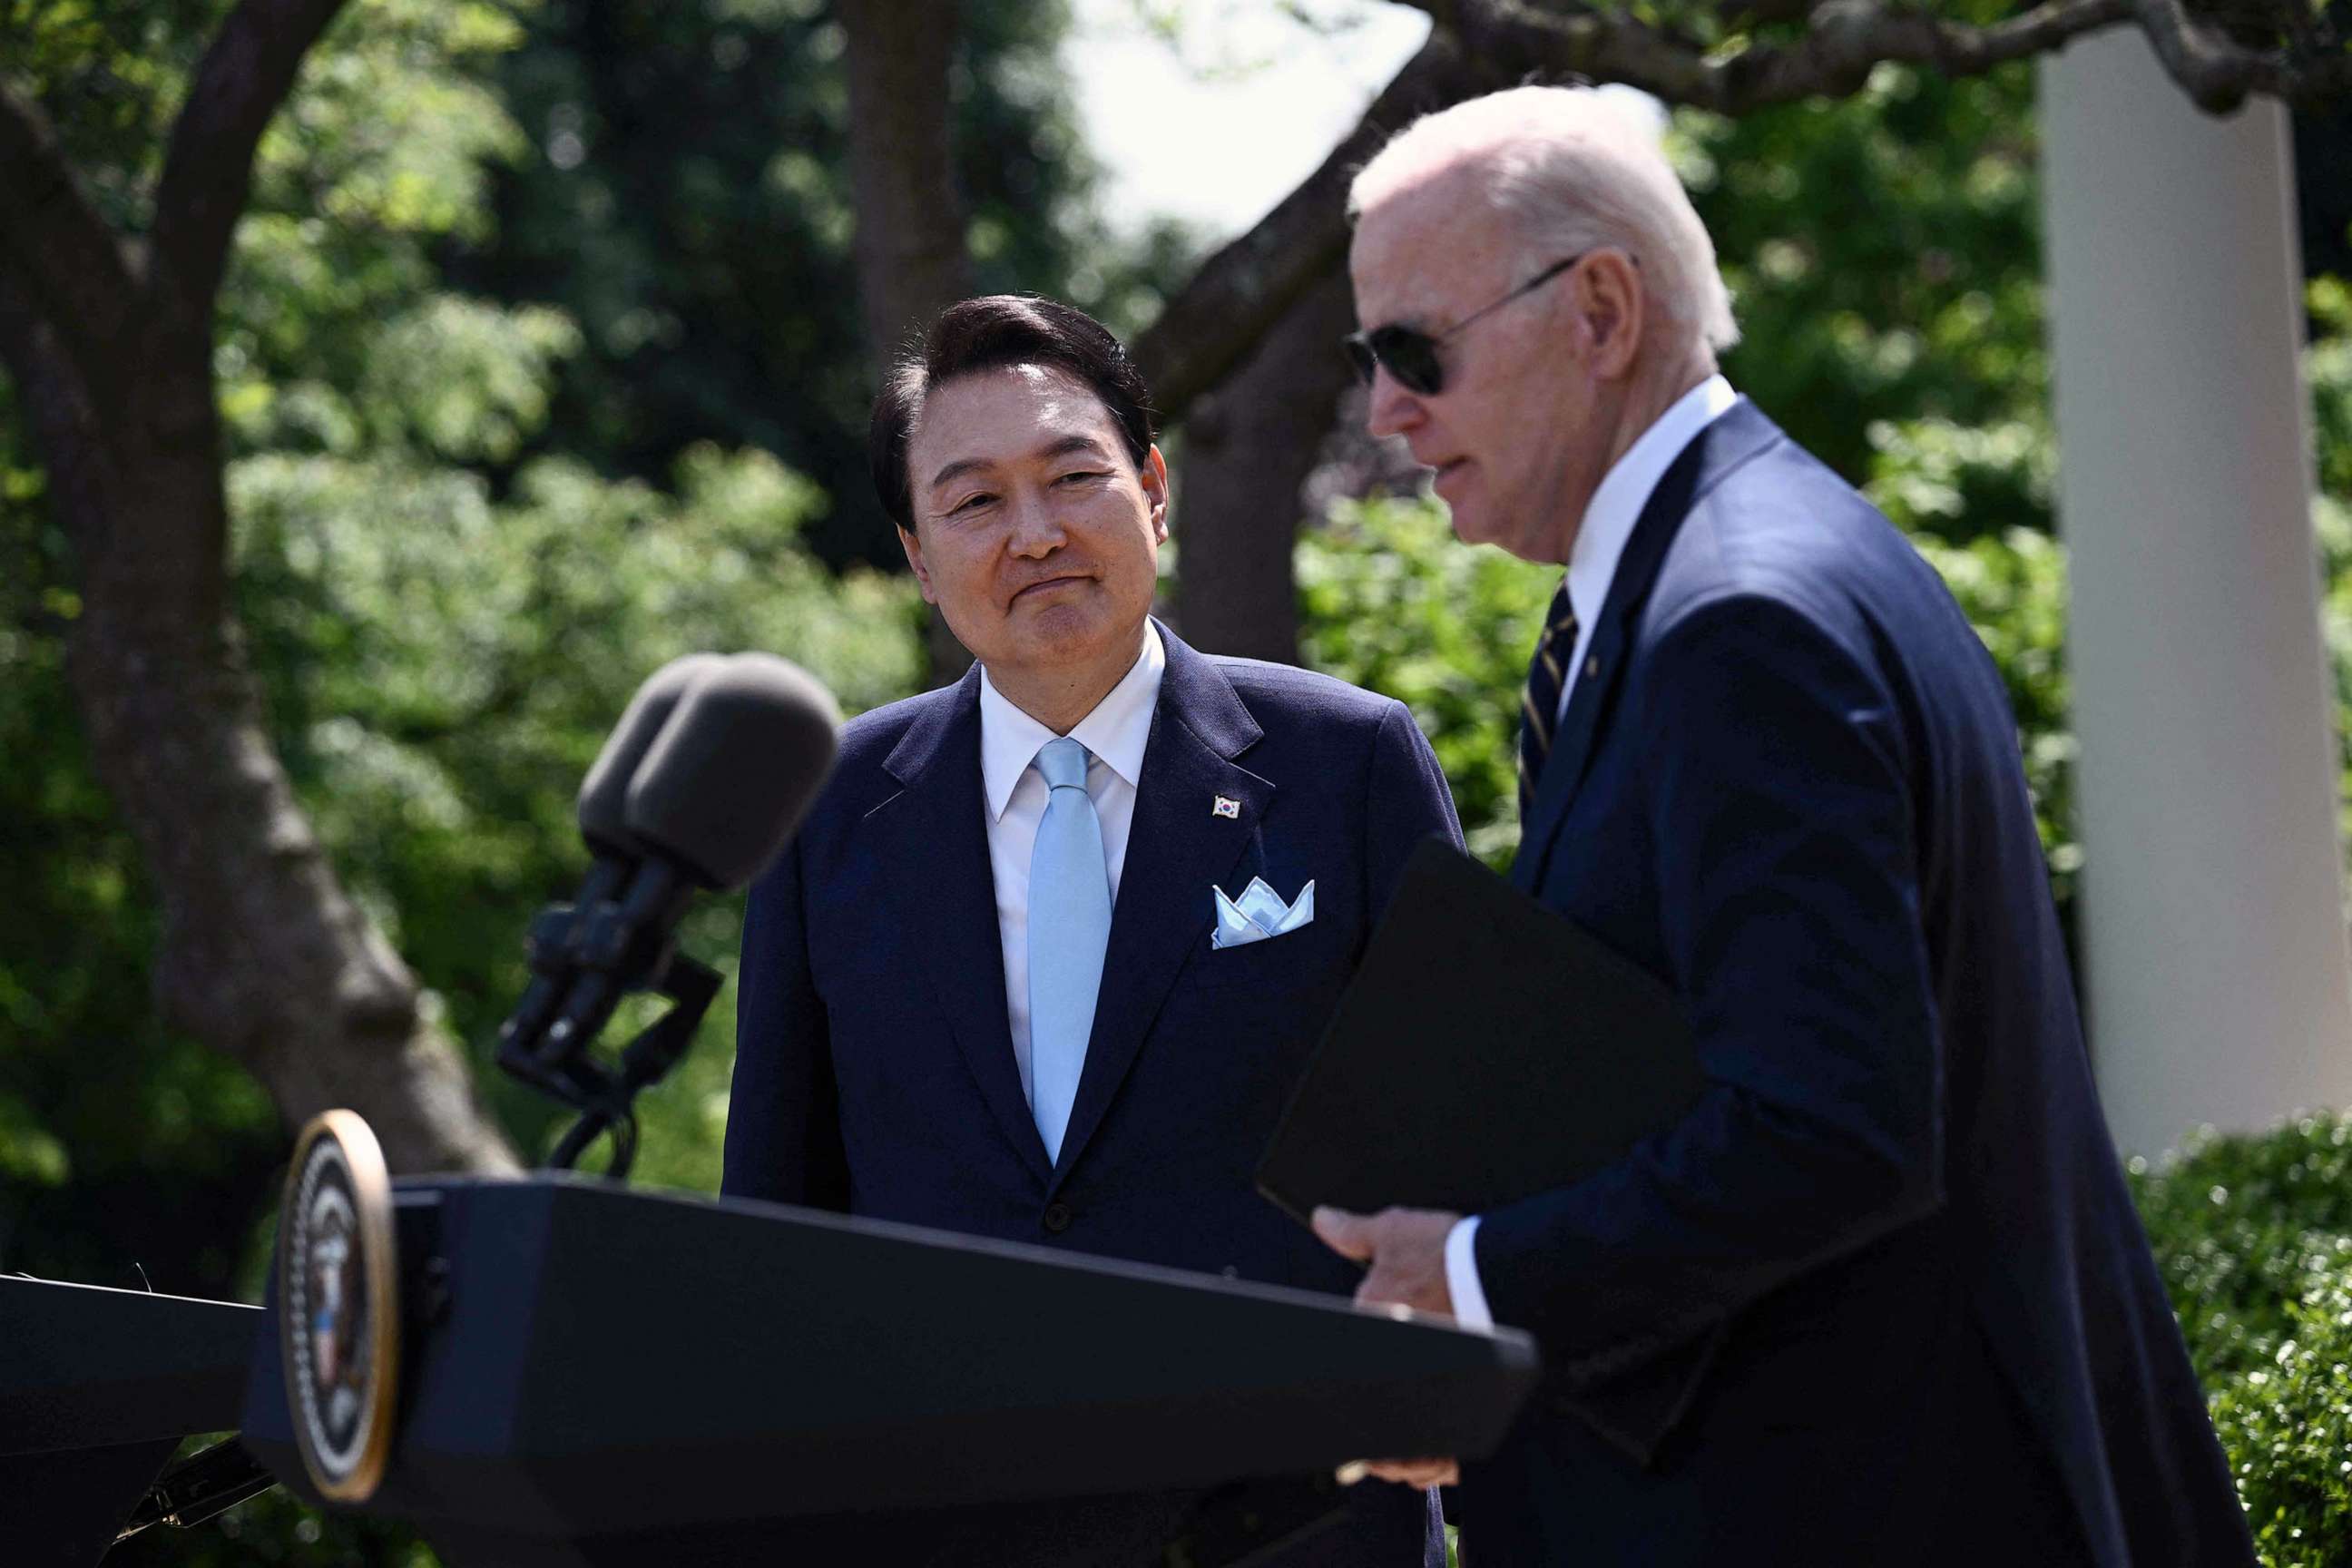 PHOTO: President Joe Biden and South Korean President Yoon Suk Yeol participate in a news conference in the Rose Garden of the White House in Washington, DC, April 26, 2023.